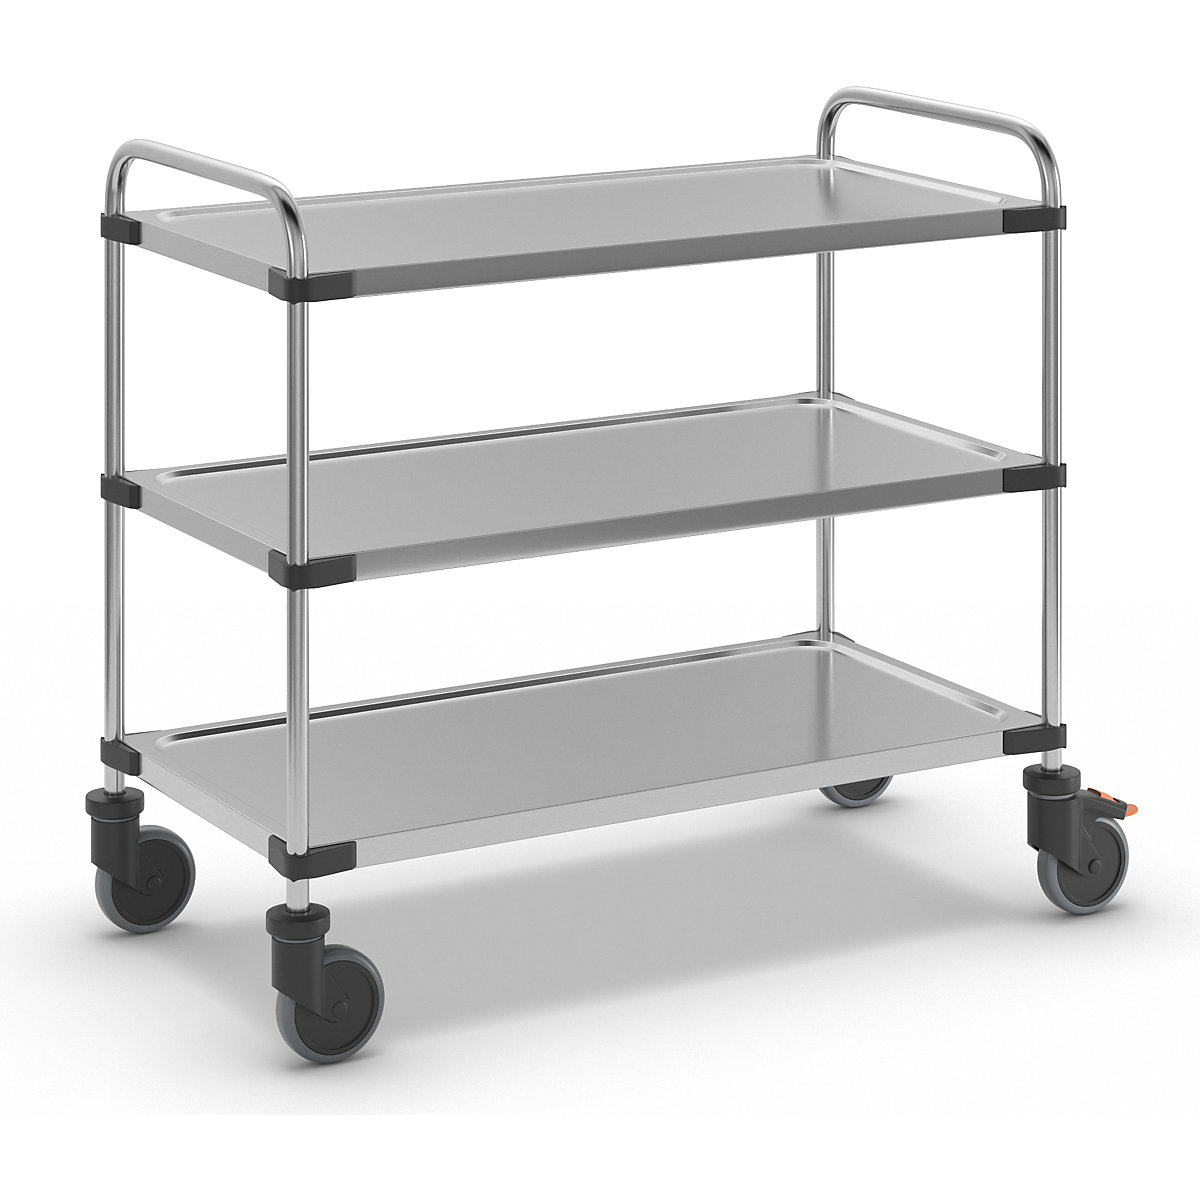 Stainless steel table trolley, with 3 shelves, LxWxH 1070 x 570 x 950 mm, assembled-1